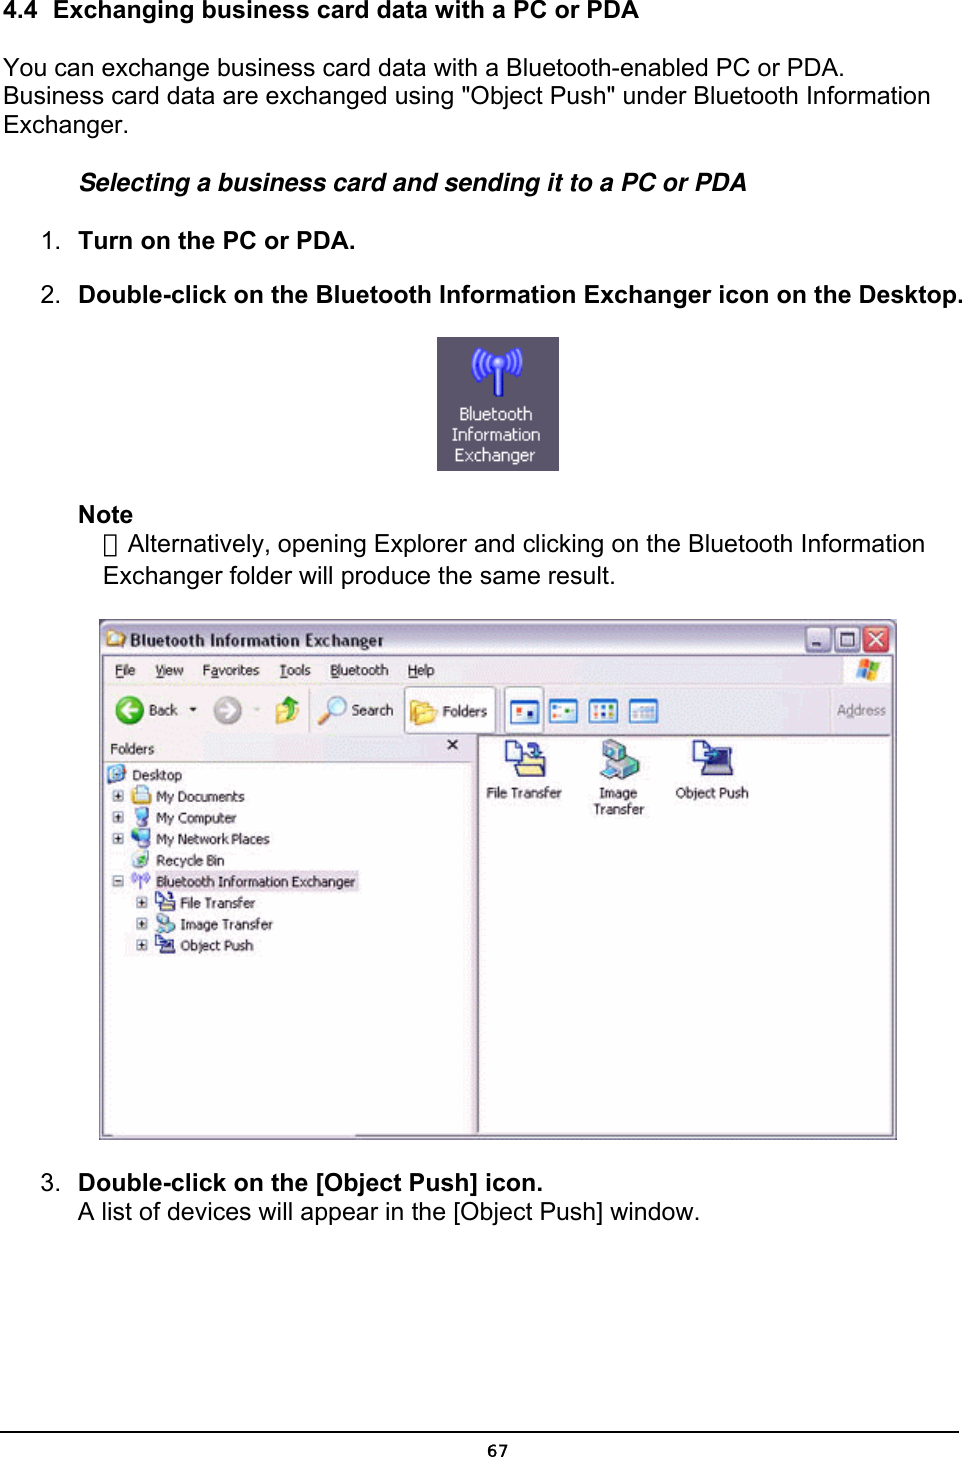  4.4  Exchanging business card data with a PC or PDA You can exchange business card data with a Bluetooth-enabled PC or PDA. Business card data are exchanged using &quot;Object Push&quot; under Bluetooth Information Exchanger. Selecting a business card and sending it to a PC or PDA 1.  Turn on the PC or PDA. 2.  Double-click on the Bluetooth Information Exchanger icon on the Desktop.  Note ．Alternatively, opening Explorer and clicking on the Bluetooth Information Exchanger folder will produce the same result.  3.  Double-click on the [Object Push] icon. A list of devices will appear in the [Object Push] window.  67